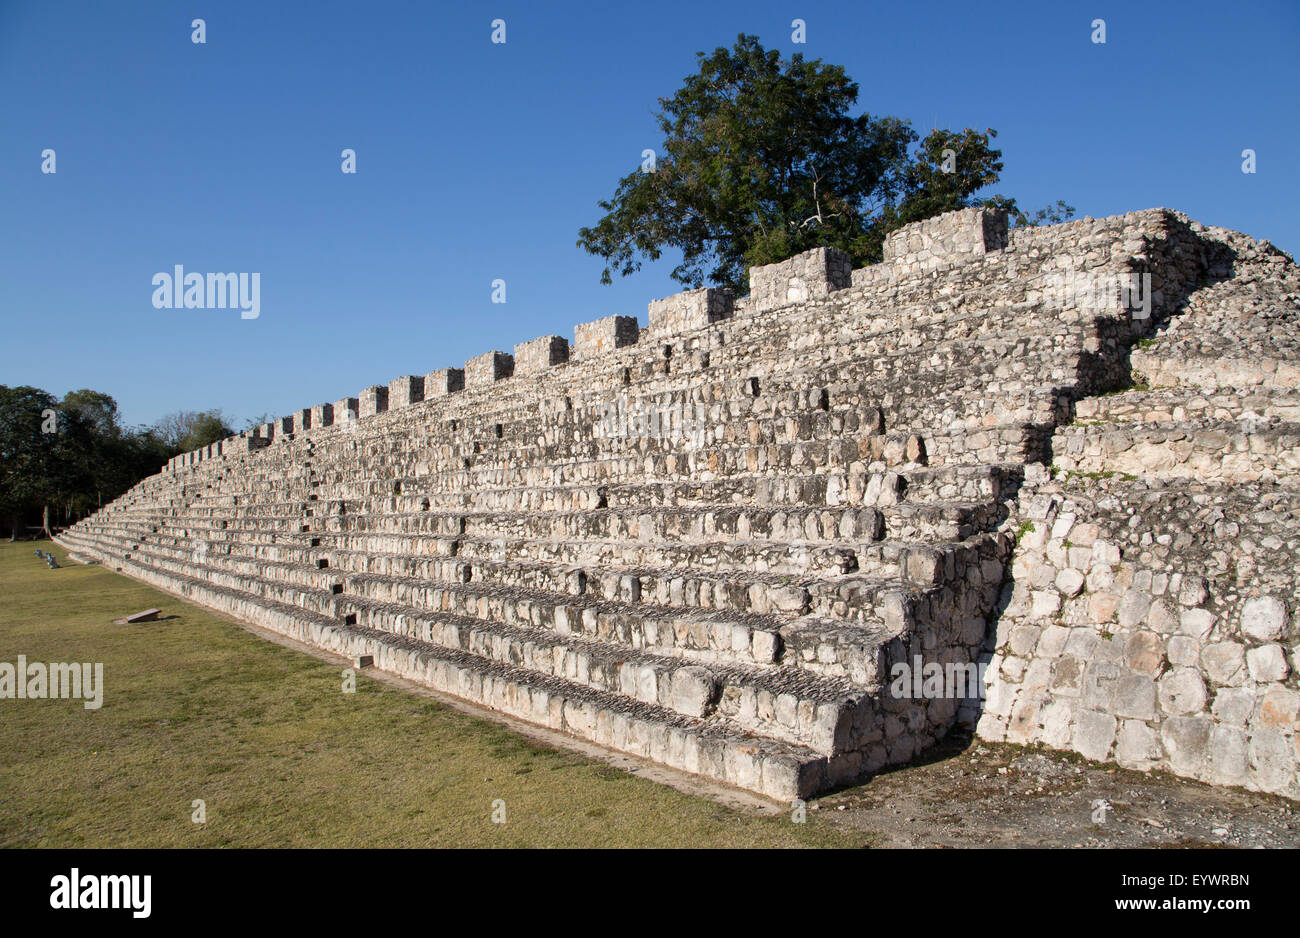 Nohochna (Large House), Edzna, Mayan archaeological site, Campeche, Mexico, North America Stock Photo